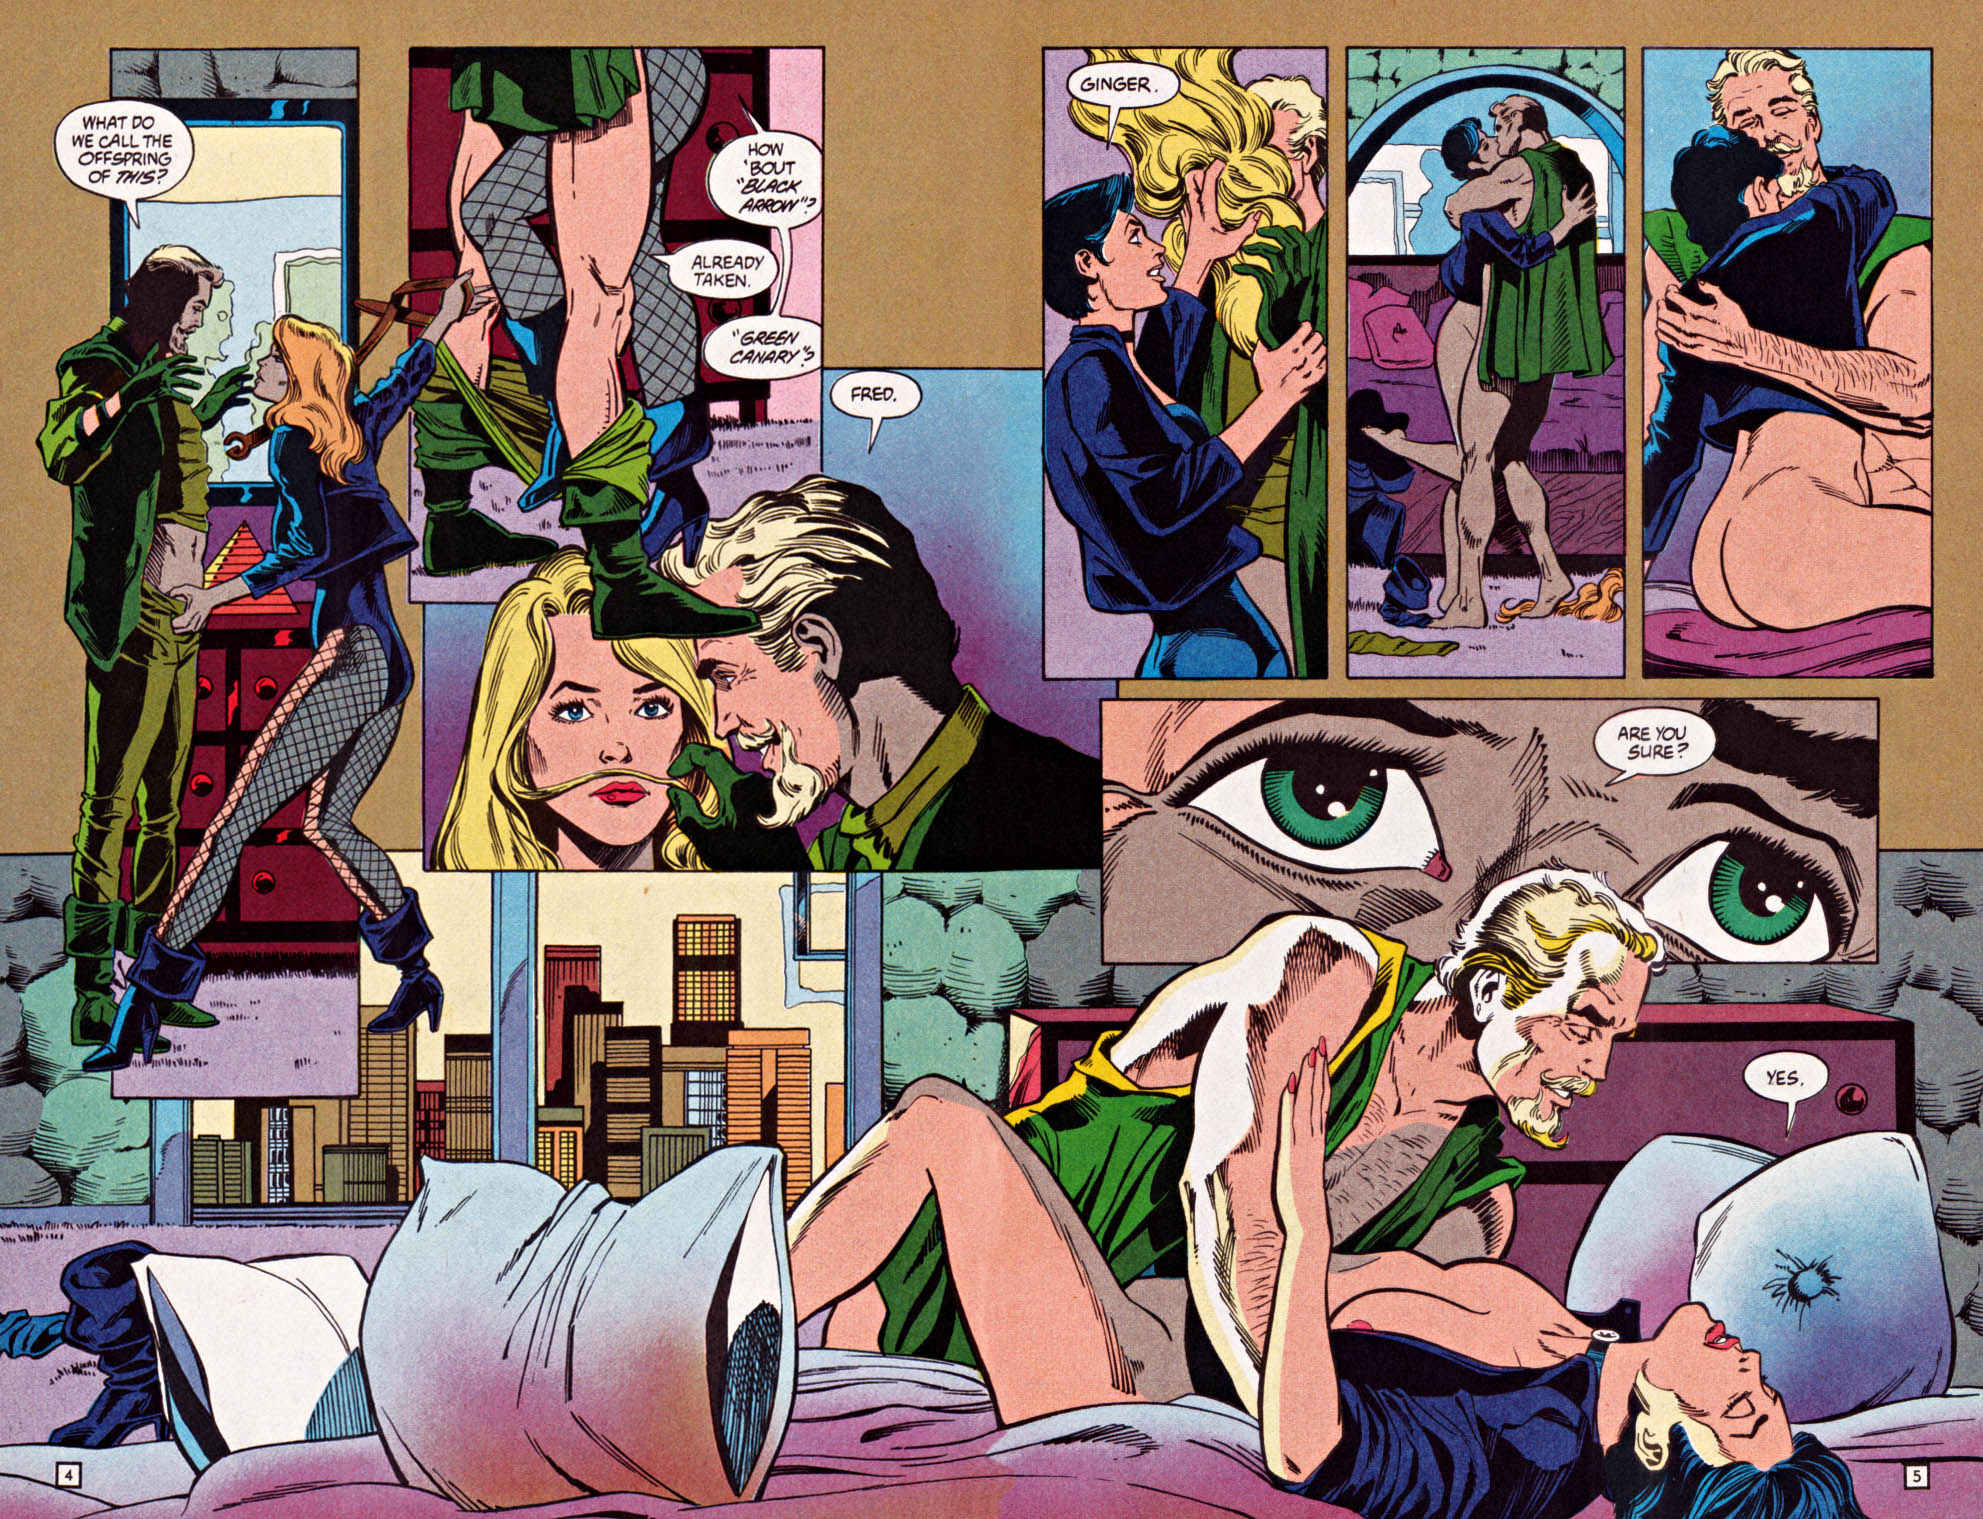 Tip: Click on the Green Arrow (1988) 34 comic image to go to the next page....